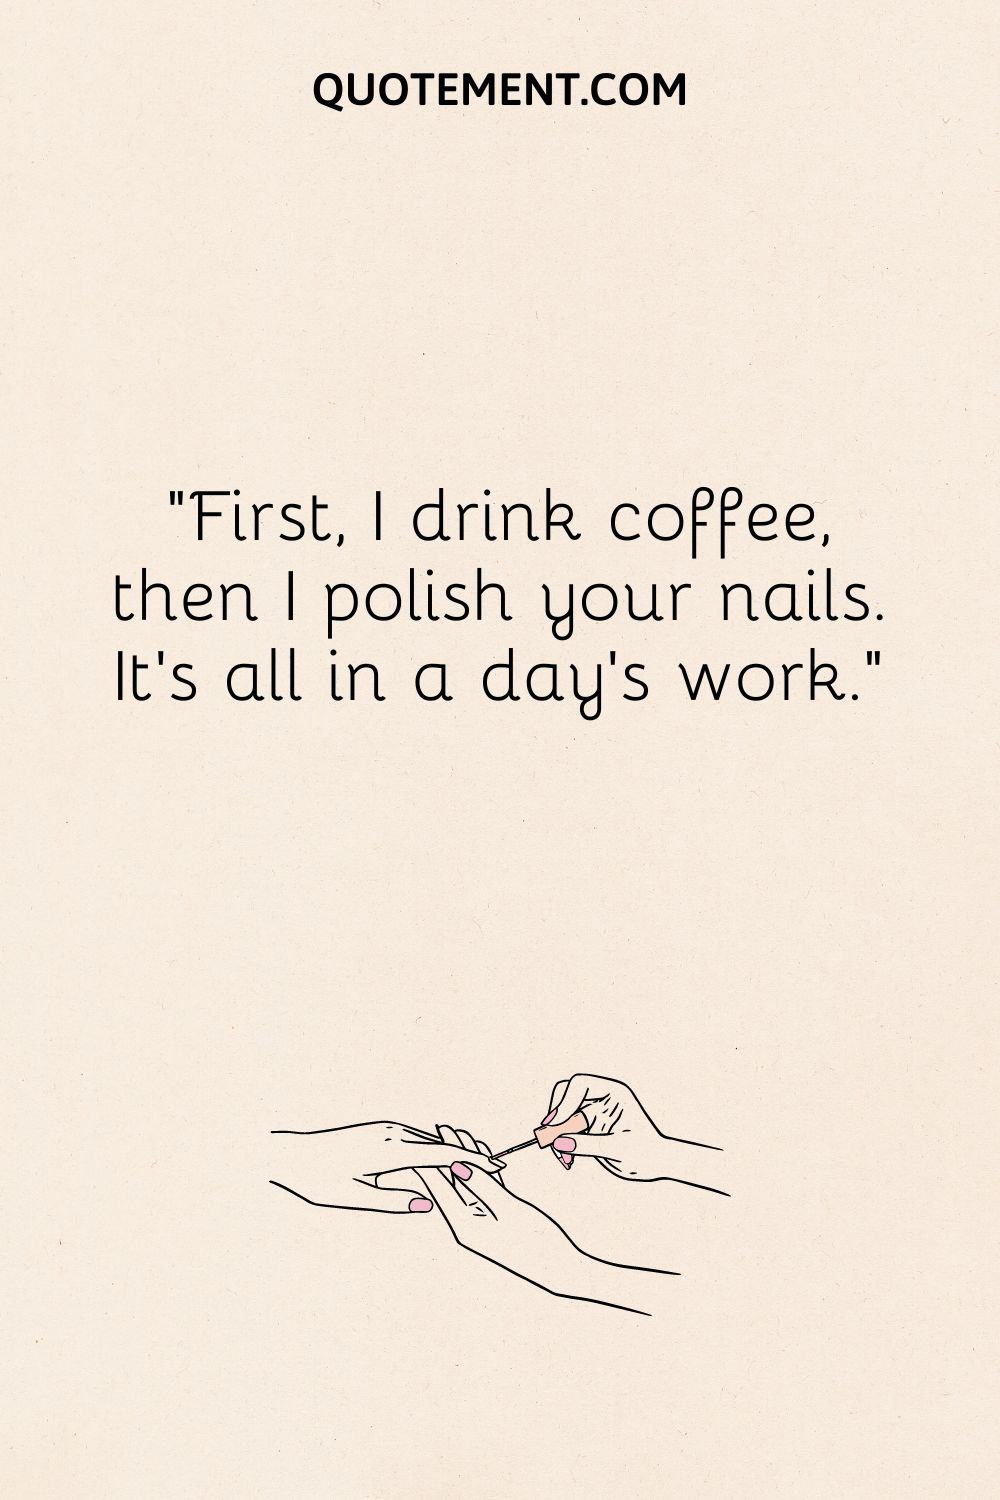 First, I drink coffee, then I polish your nails. It’s all in a day’s work